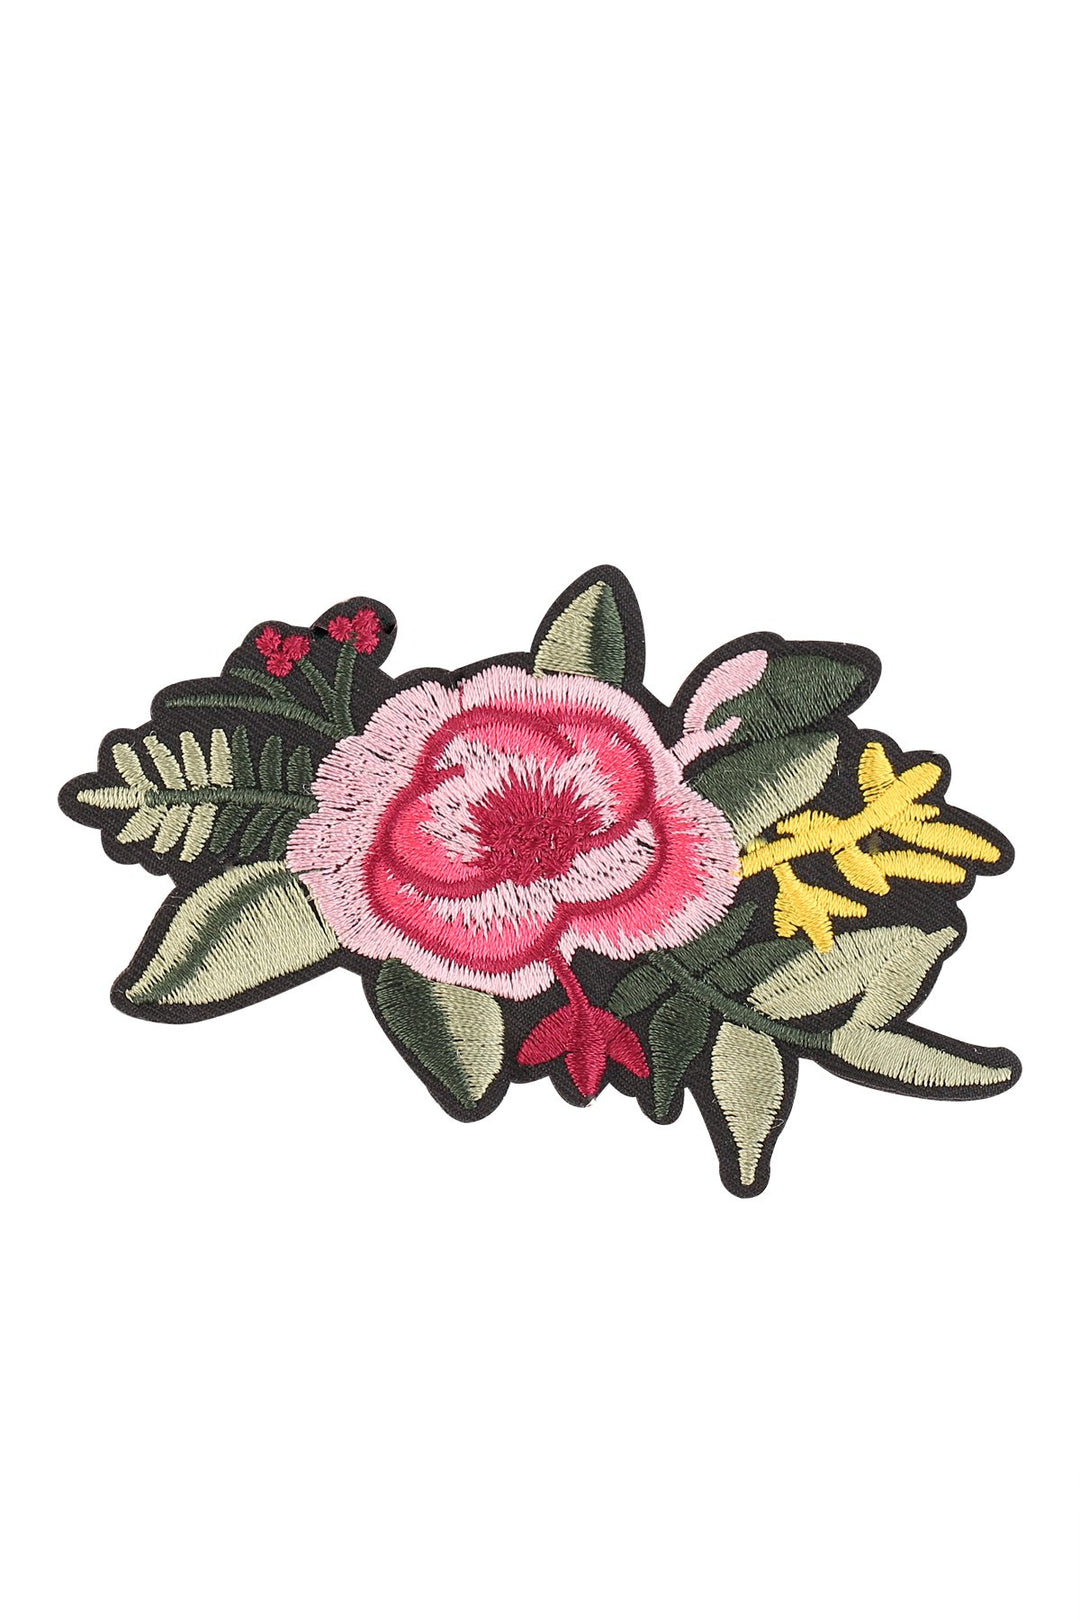 Colourful Floral Sew on Embroidery Patch